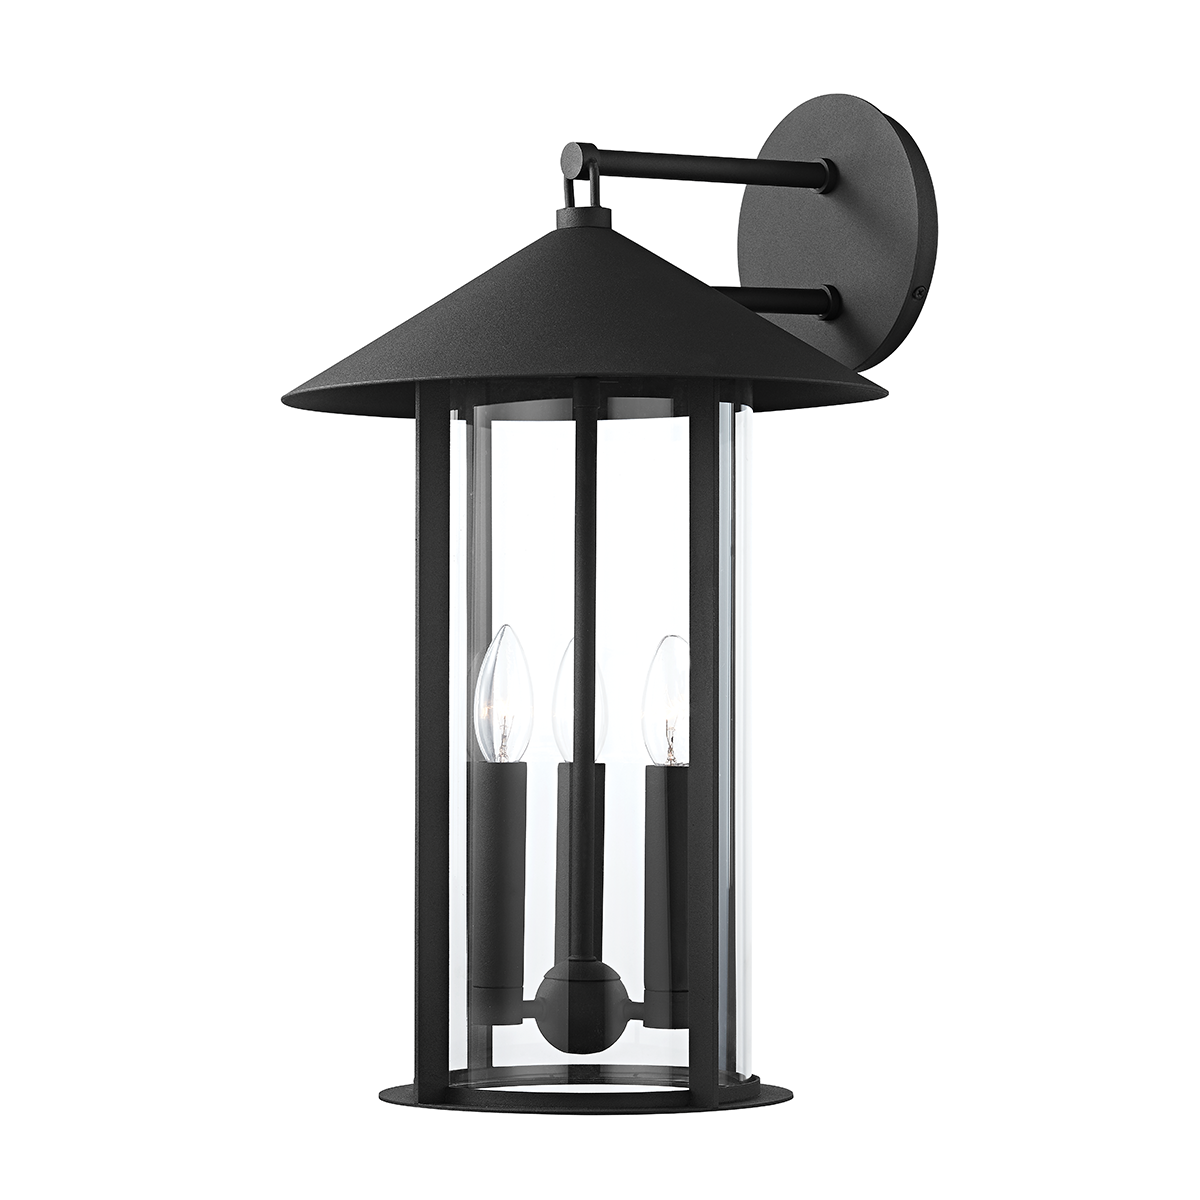 Troy LONG BEACH 4 LIGHT EXTERIOR WALL SCONCE B1953 Outdoor l Wall Troy Lighting TEXTURE BLACK  